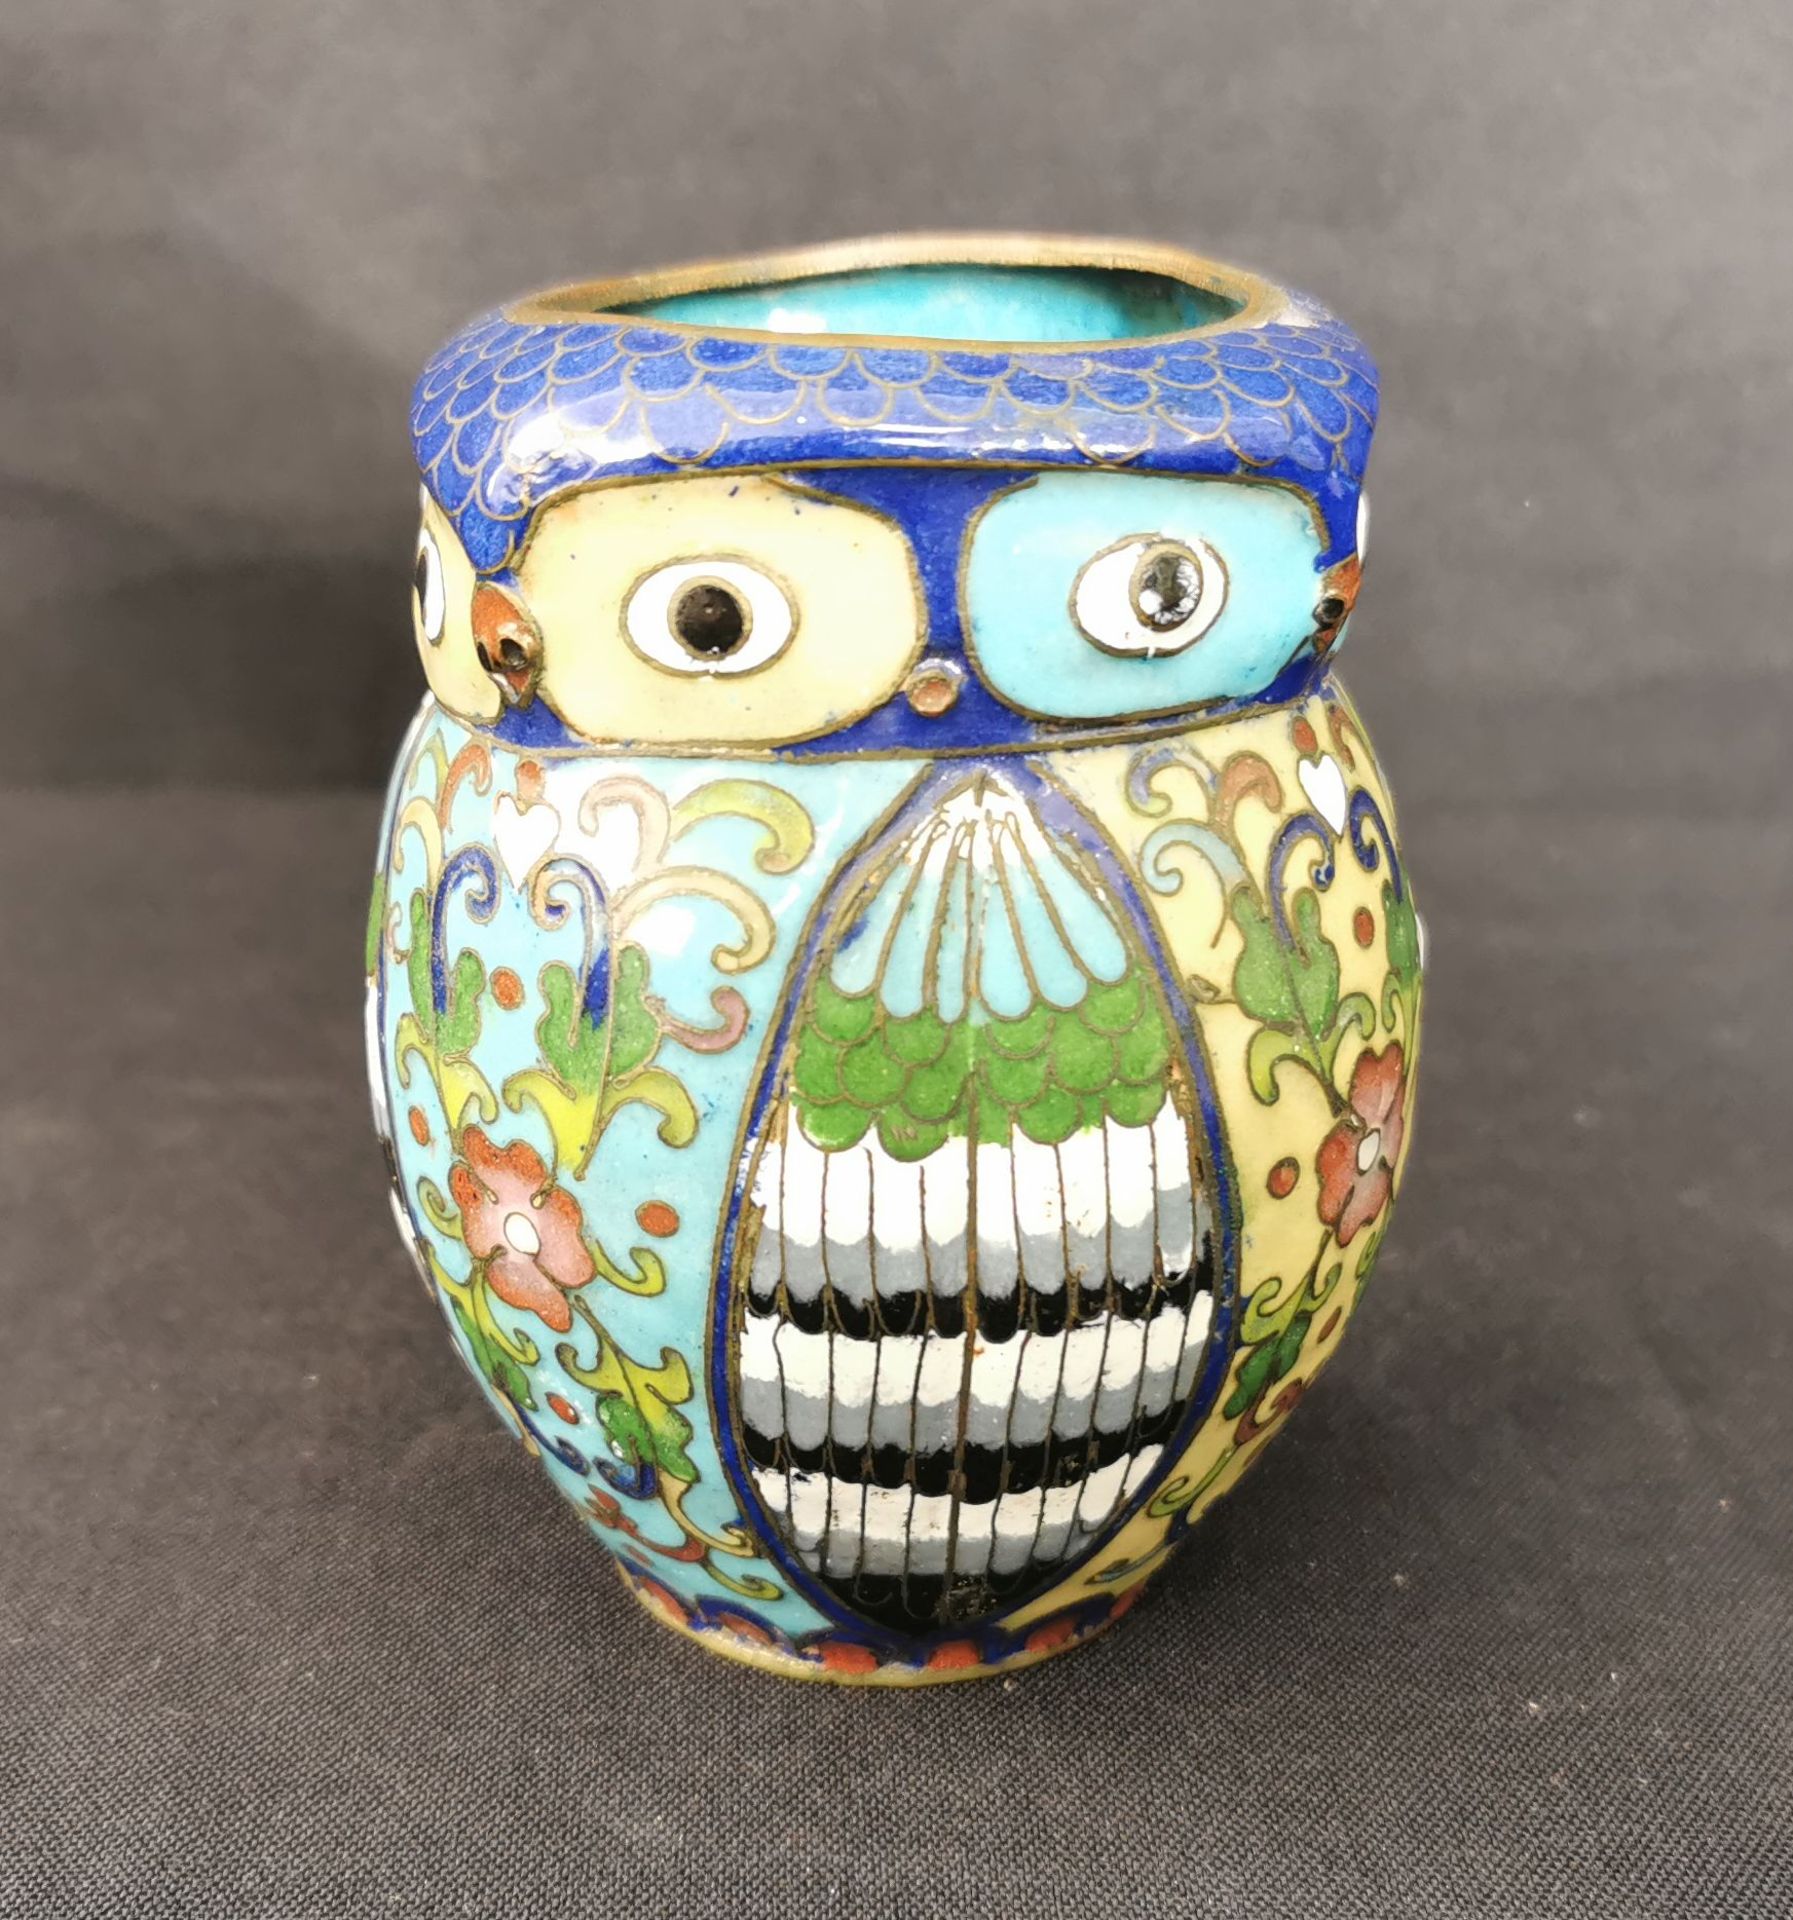 SMALL CLOISONNE VASE "OWL" - Image 2 of 4